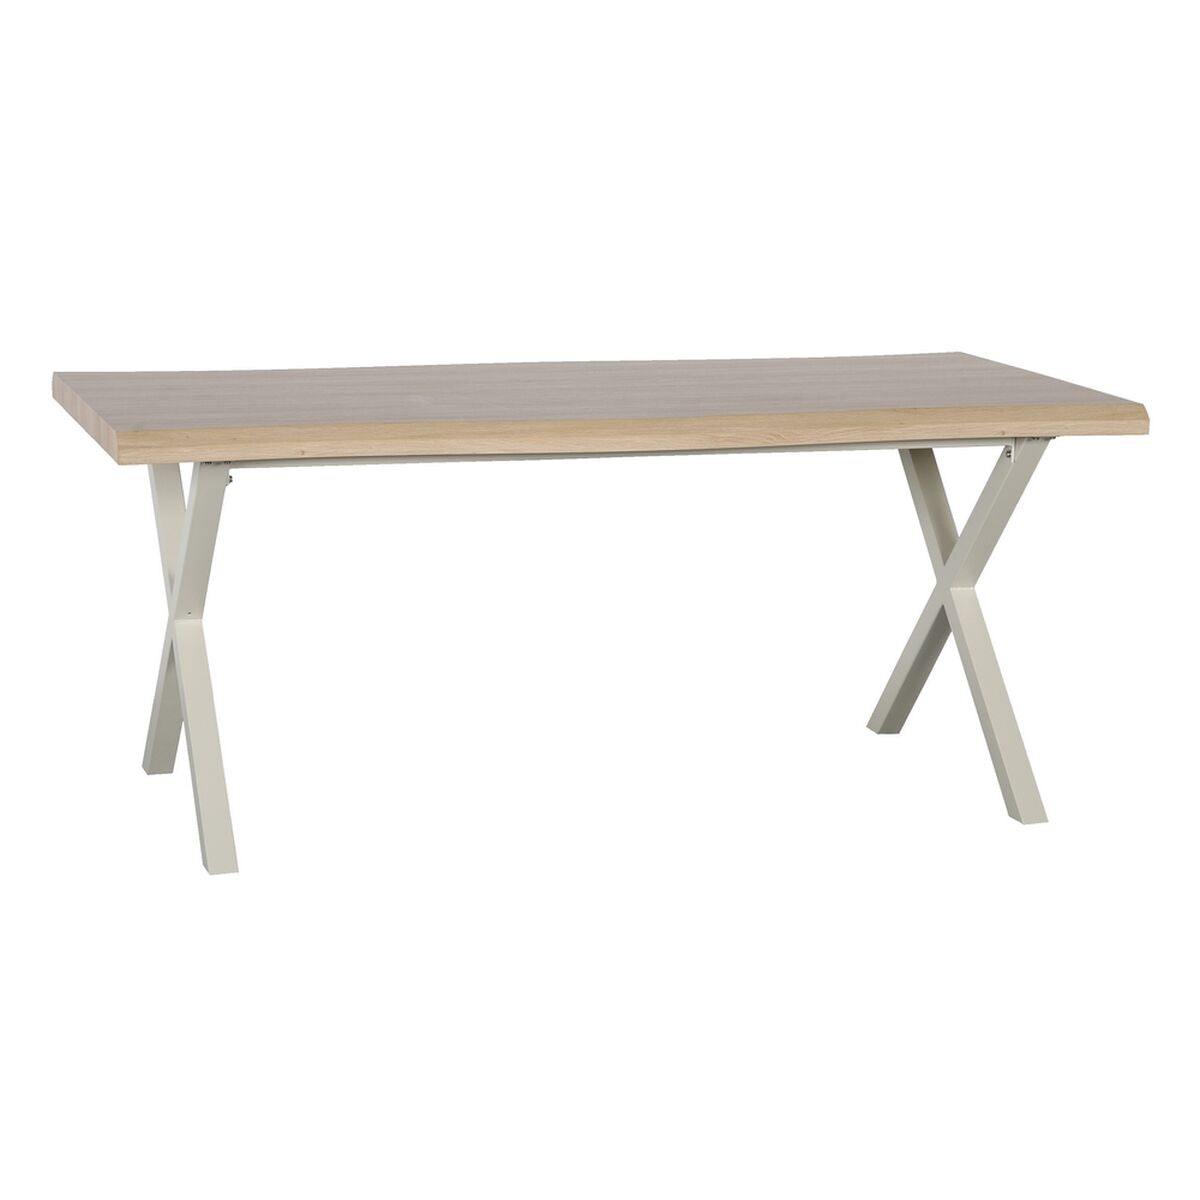 Dining Table with Cream Metal Legs (180 x 90 x 75)